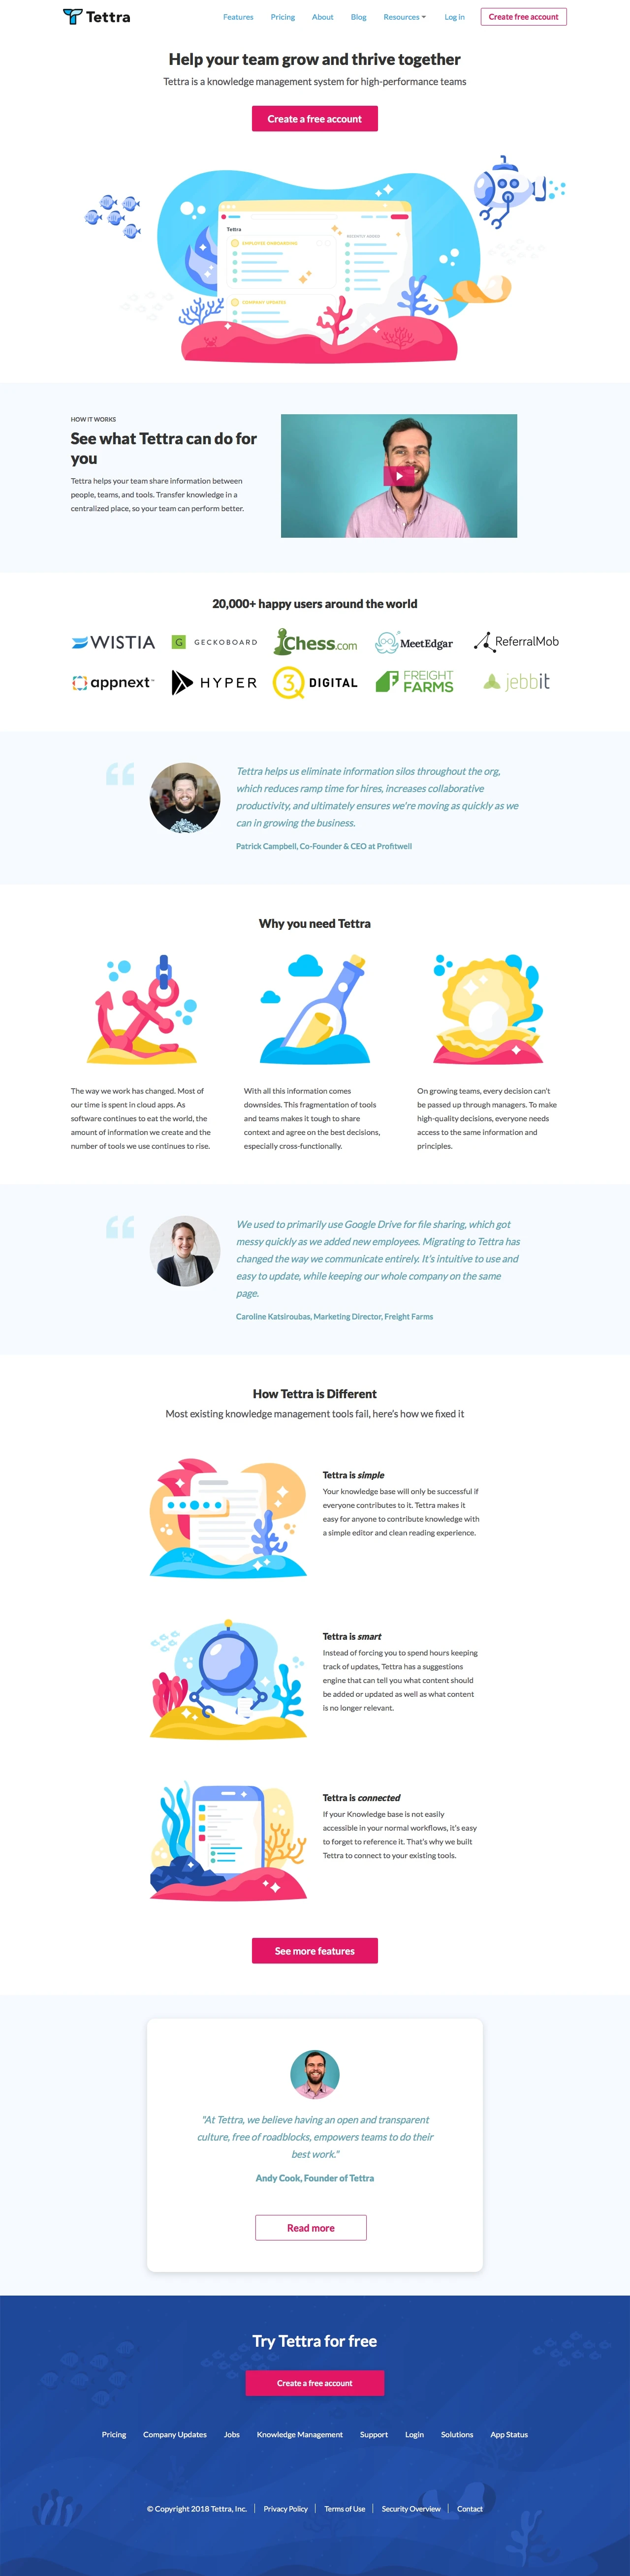 Tettra Landing Page Example: Tettra is a knowledge management system for high-performance teams